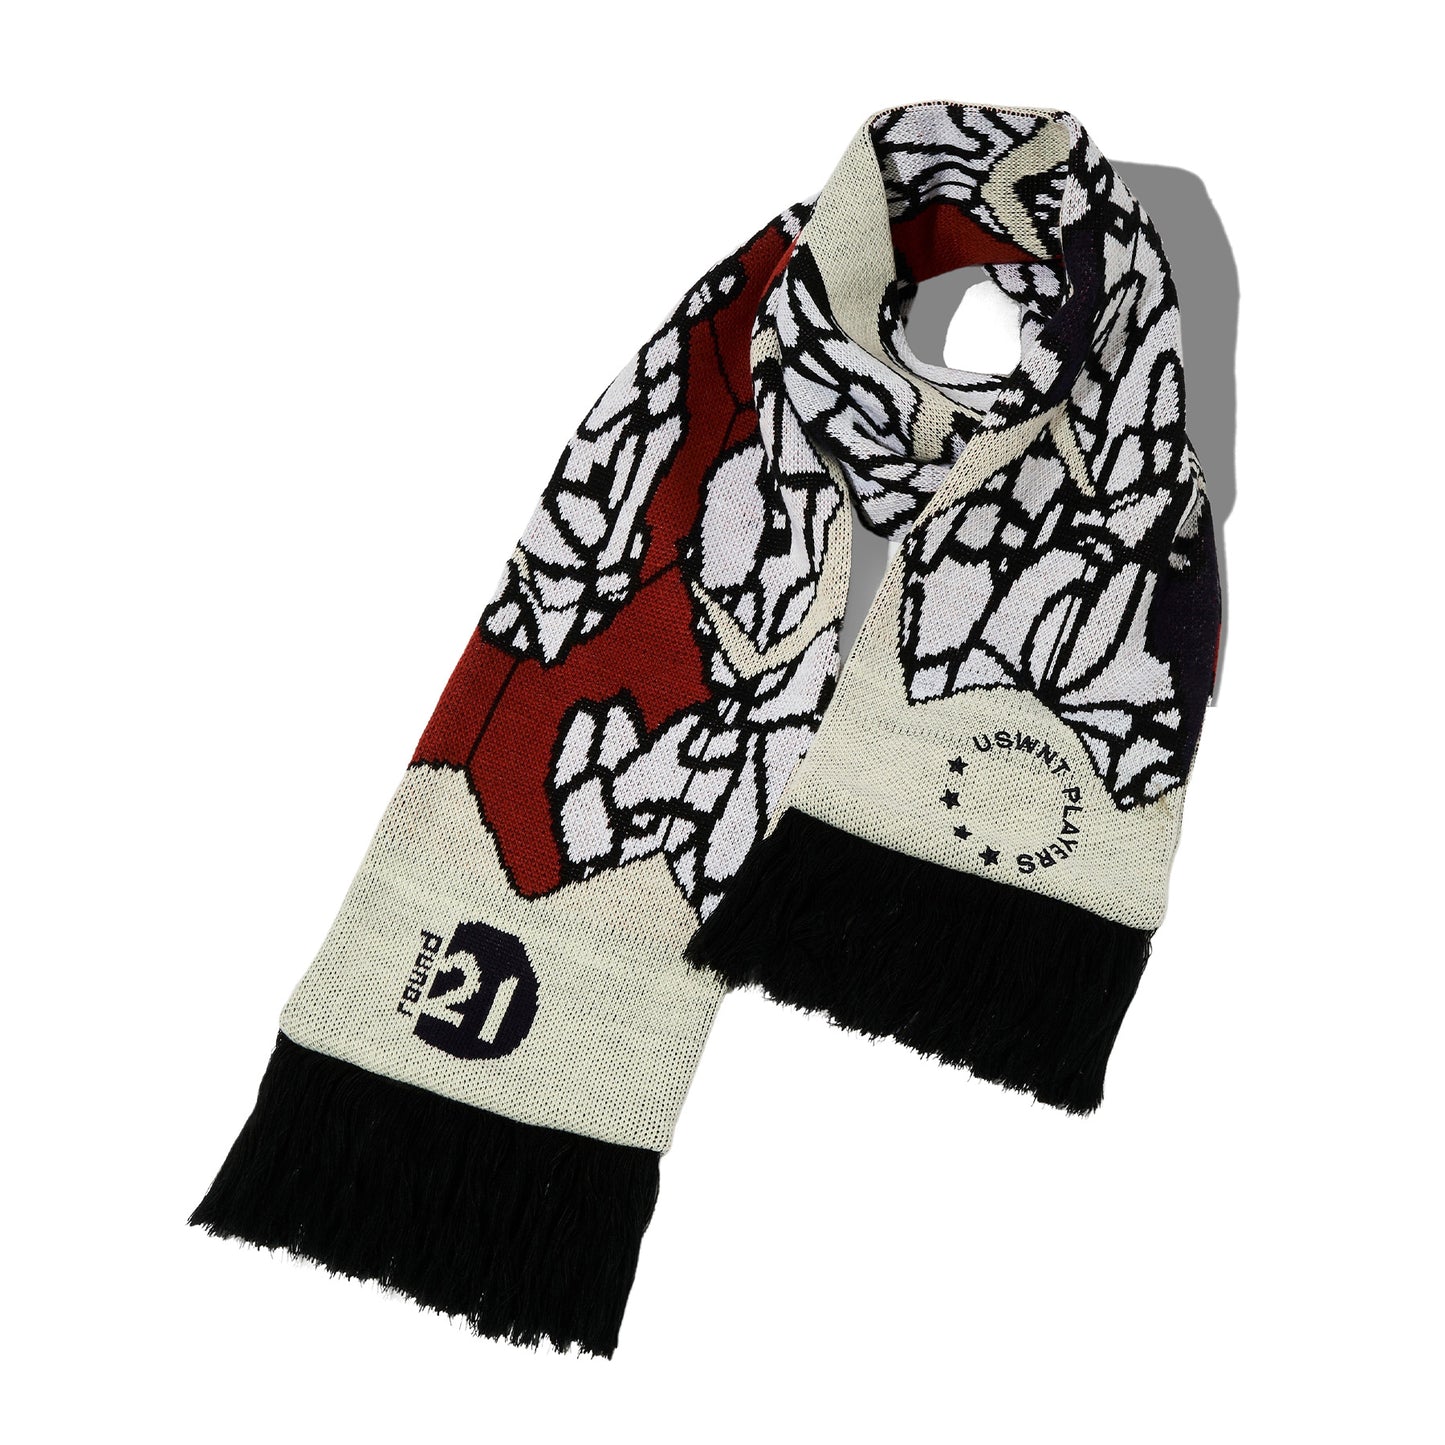 Official USWNT Players Association Scarf